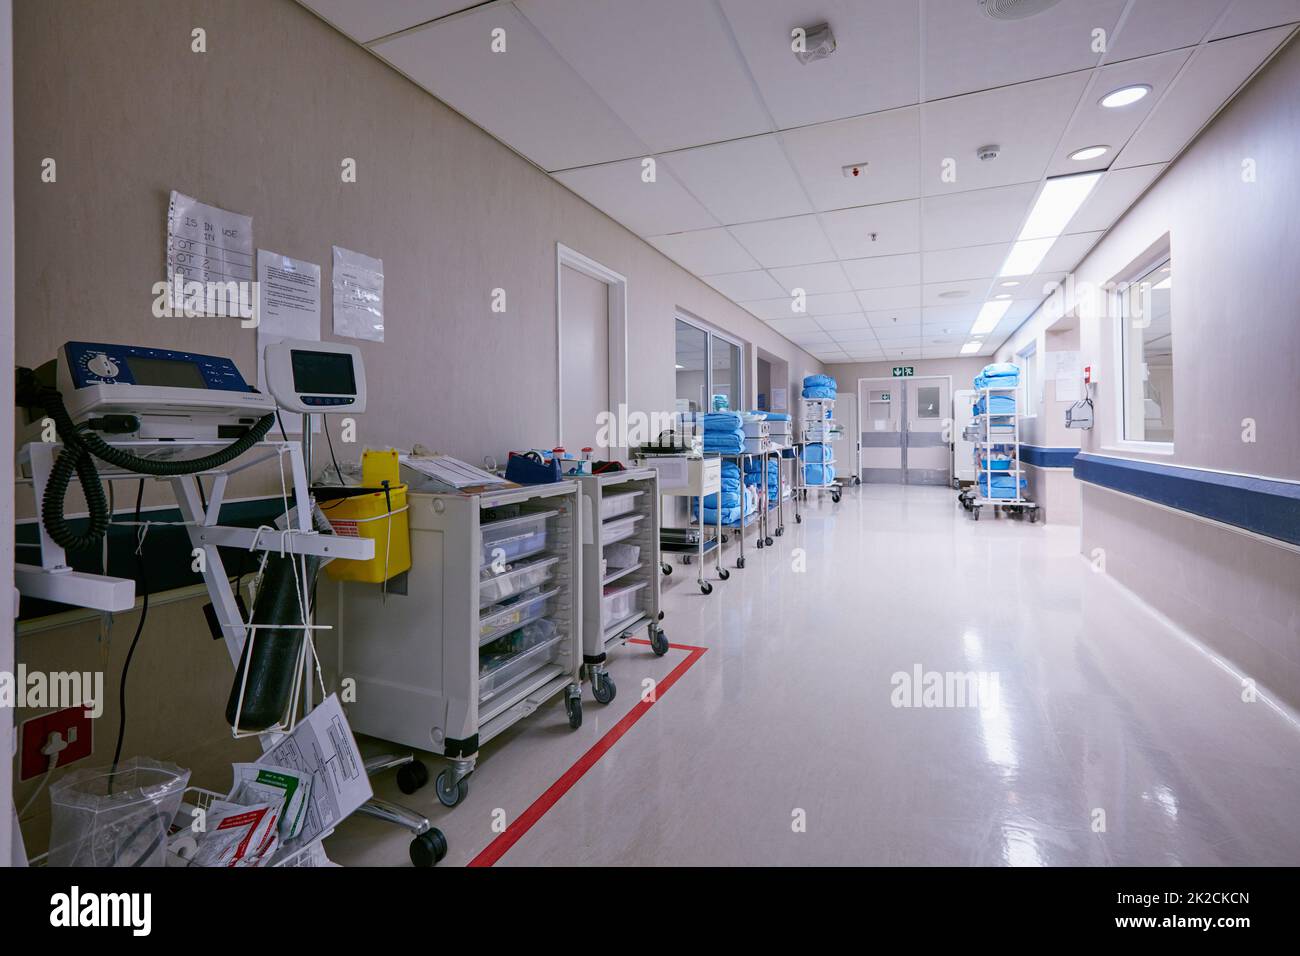 The hallway of healing. Shot of an empty passage way with medical equipment alongside the walls at a hospital. Stock Photo